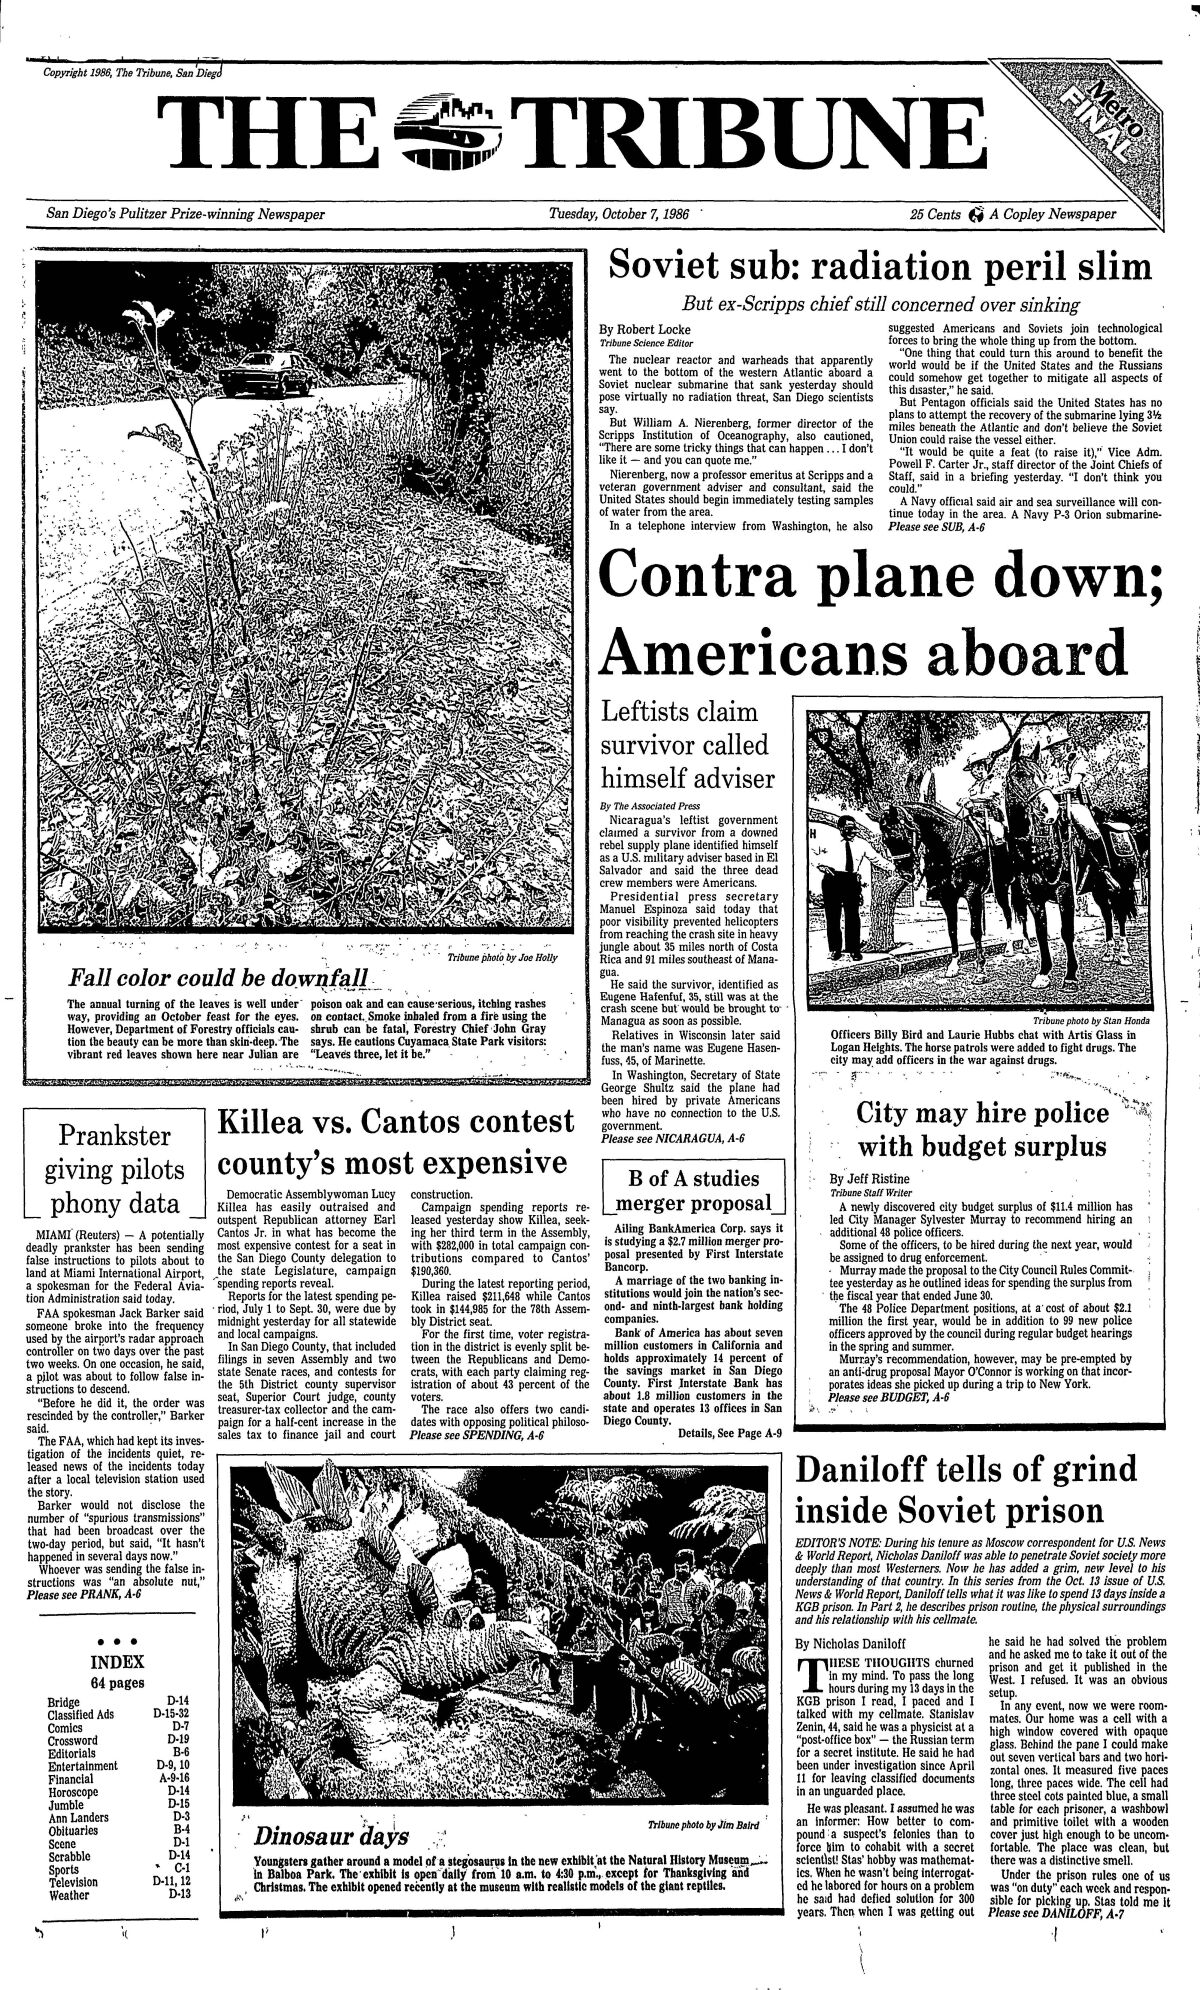 Front page of The Tribune, Tuesday, Oct. 7, 1986